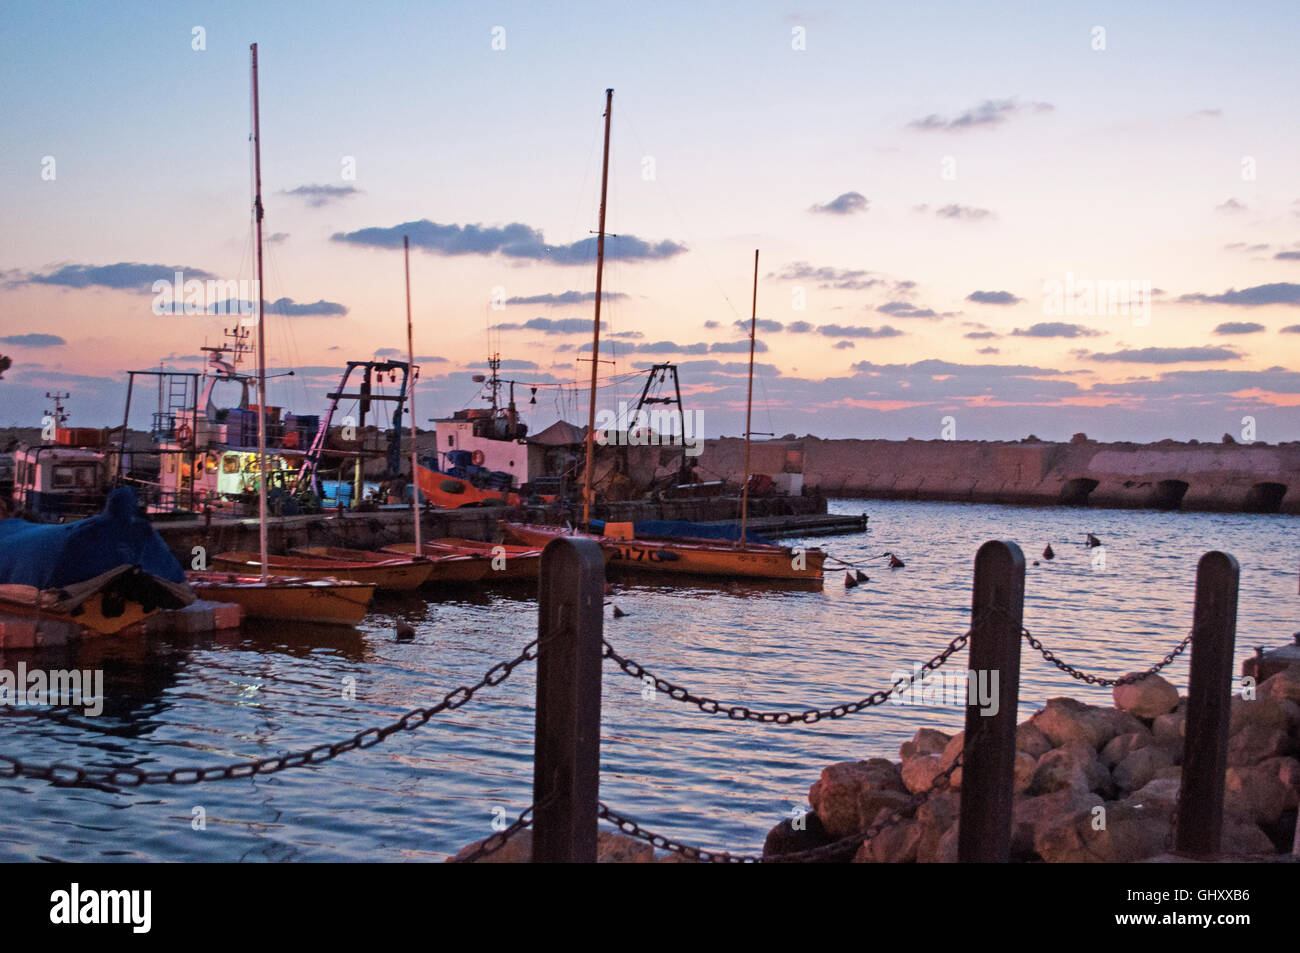 Israel, Middle East: sunset and fishing boats at the port of Old Jaffa, the oldest part of Tel Aviv Yafo, a fishermen village Stock Photo